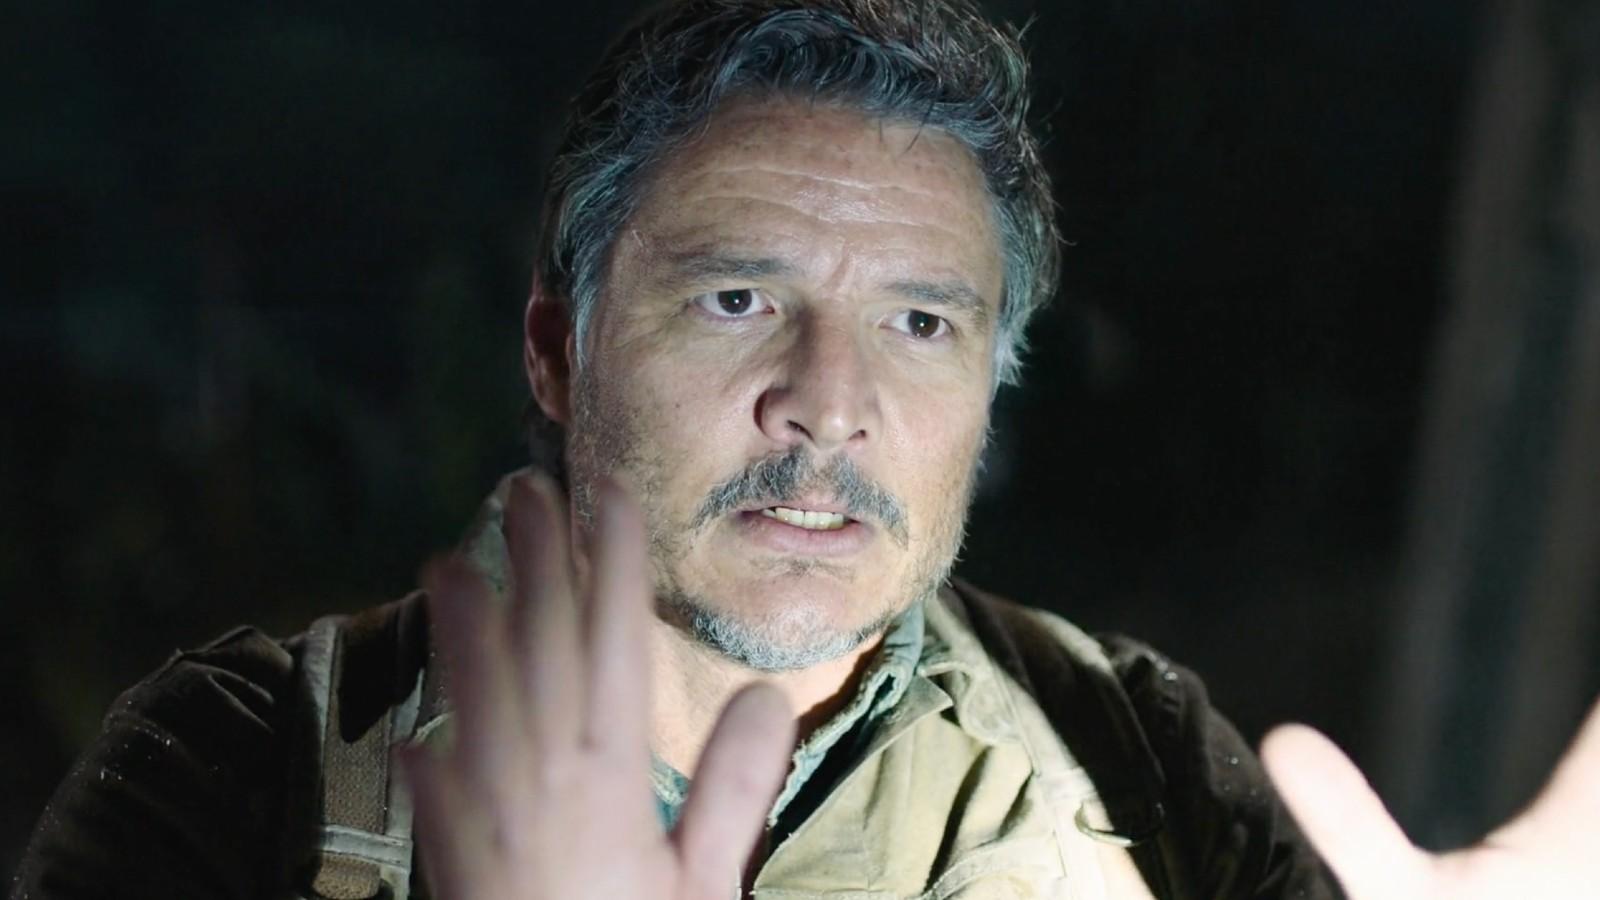 Pedro Pascal as Joel in The Last of Us HBO show, Episode 1